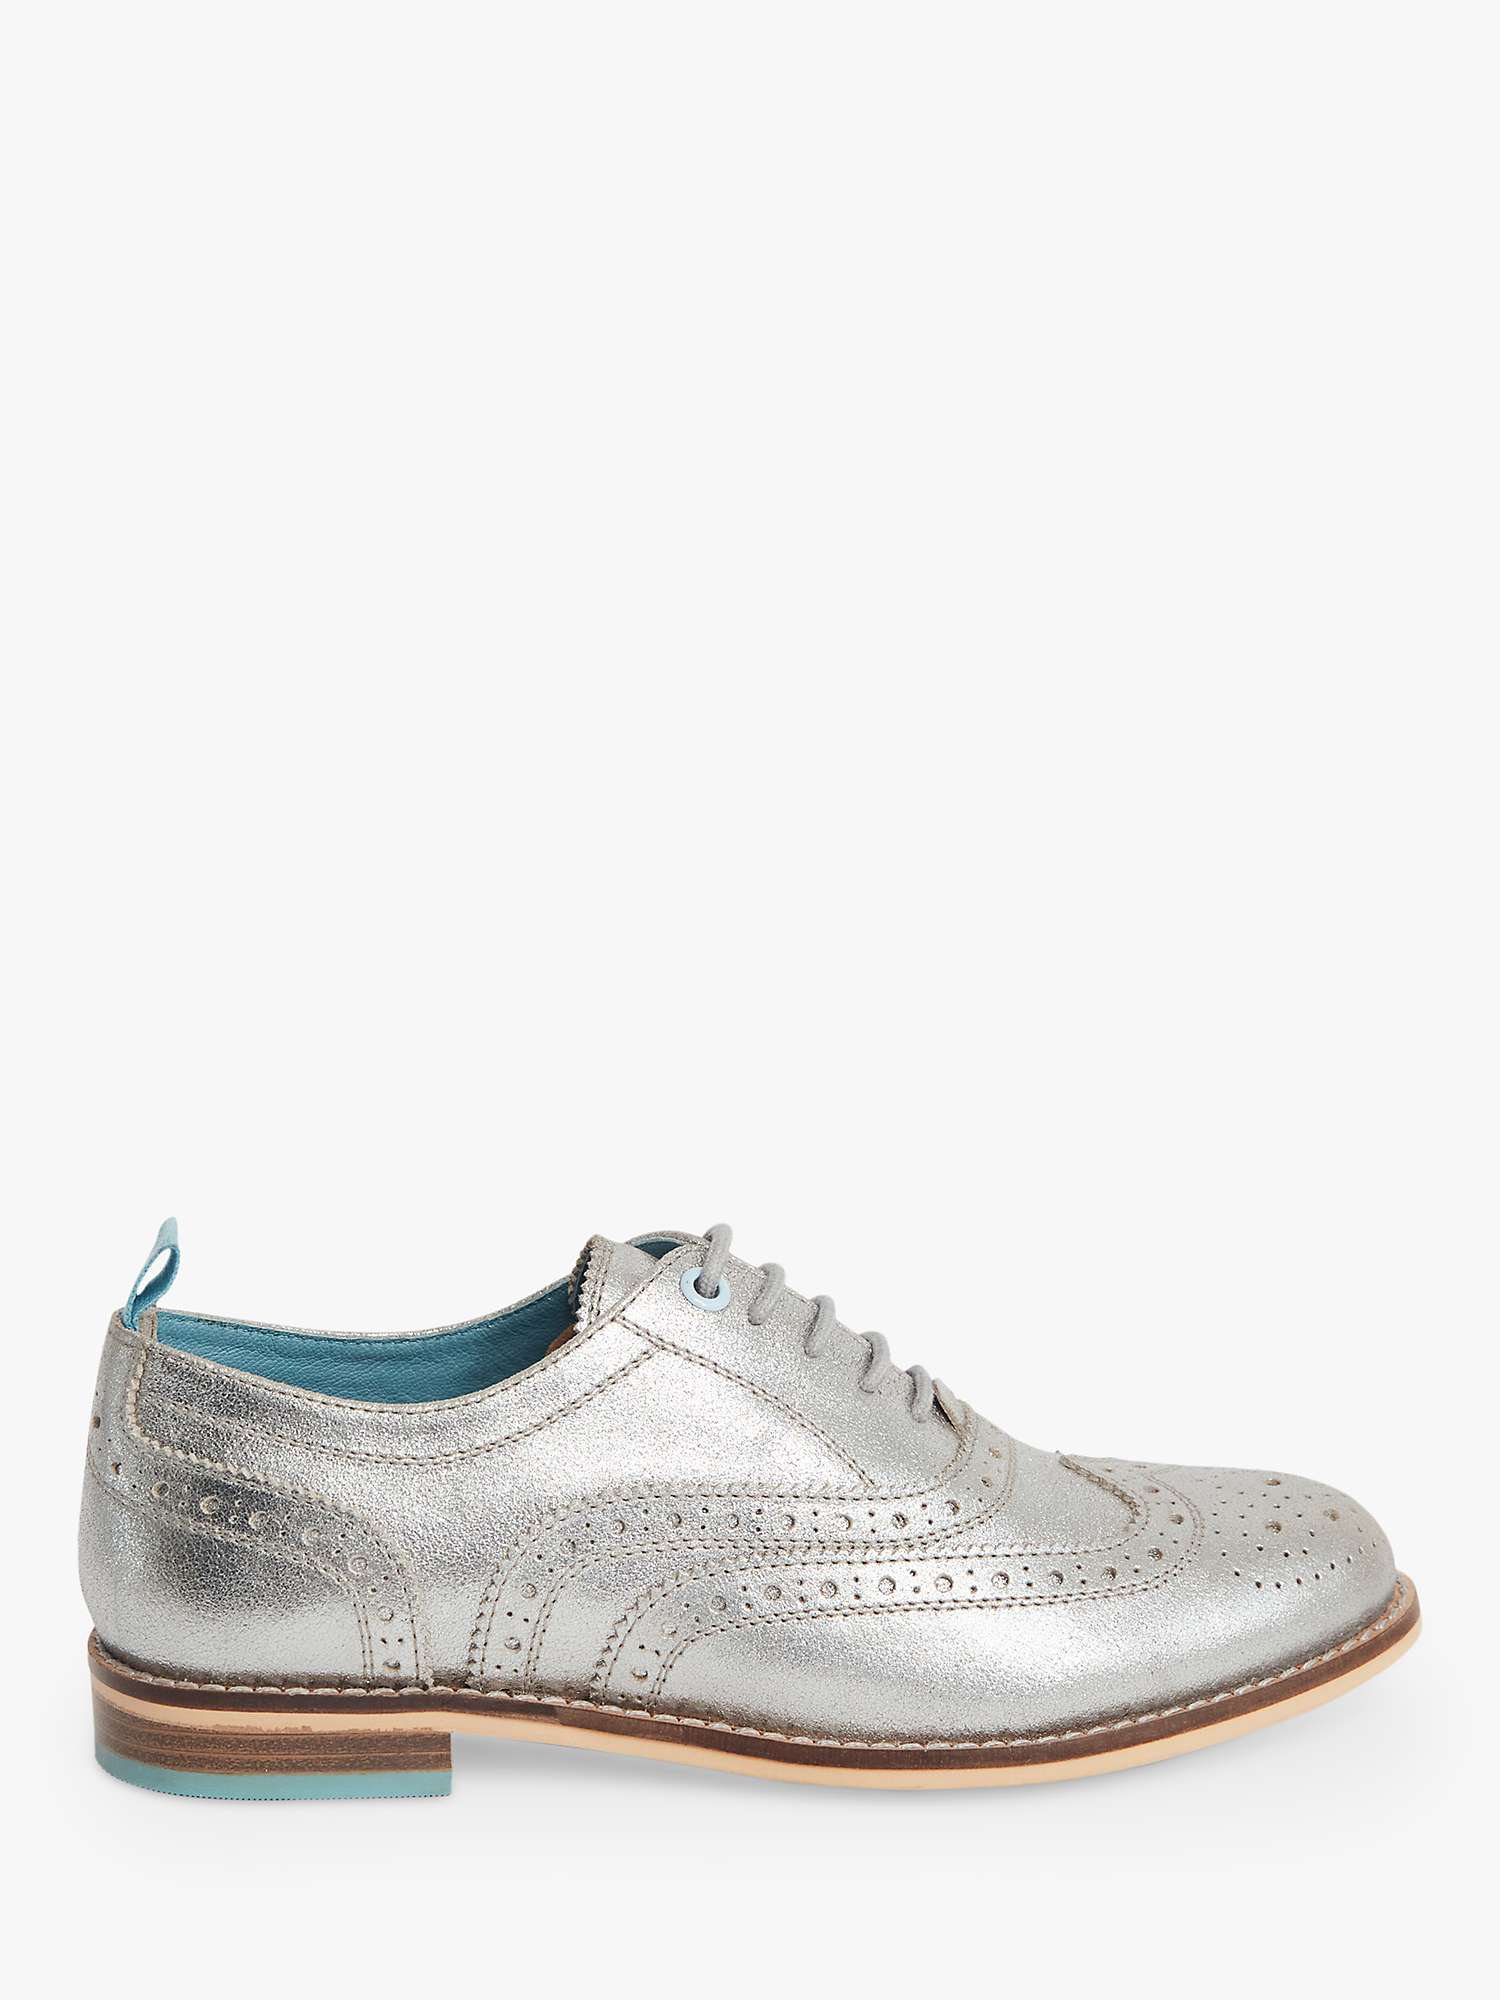 Buy White Stuff Thistle Leather Brogues Online at johnlewis.com